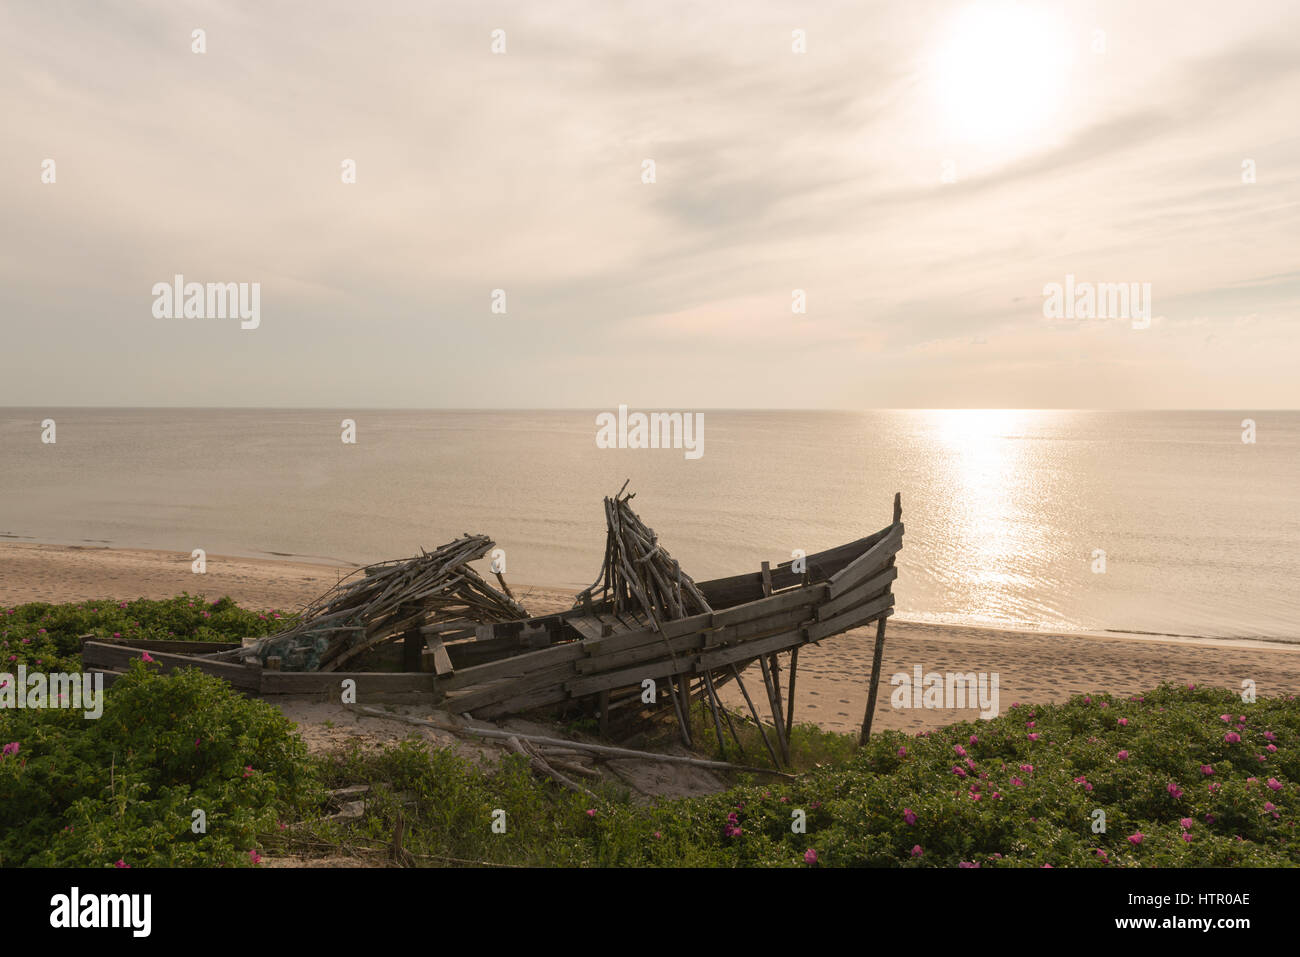 Works of art on the Courland Spit, Baltic Sea, Lithuania, Eastern Europe Stock Photo